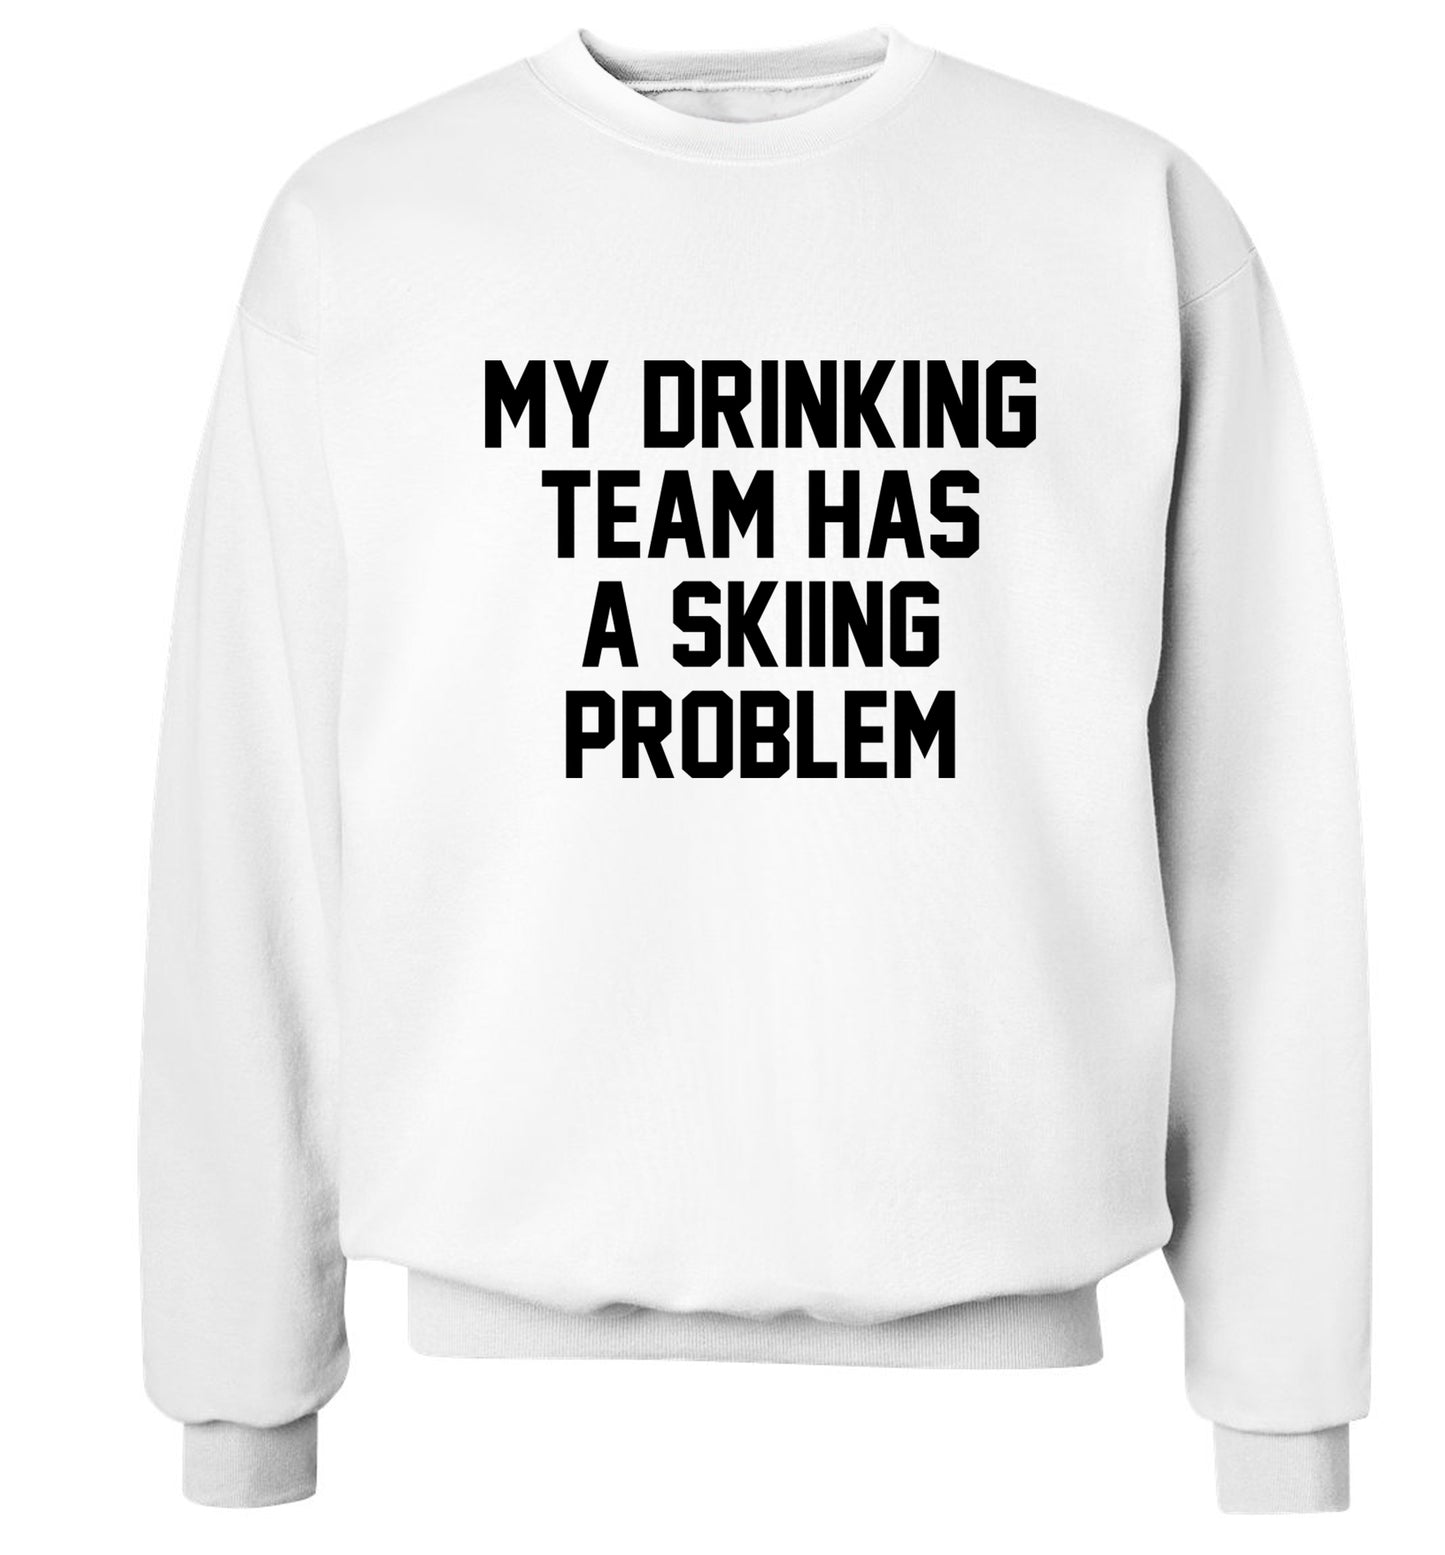 My drinking team has a skiing problem Adult's unisexwhite Sweater 2XL